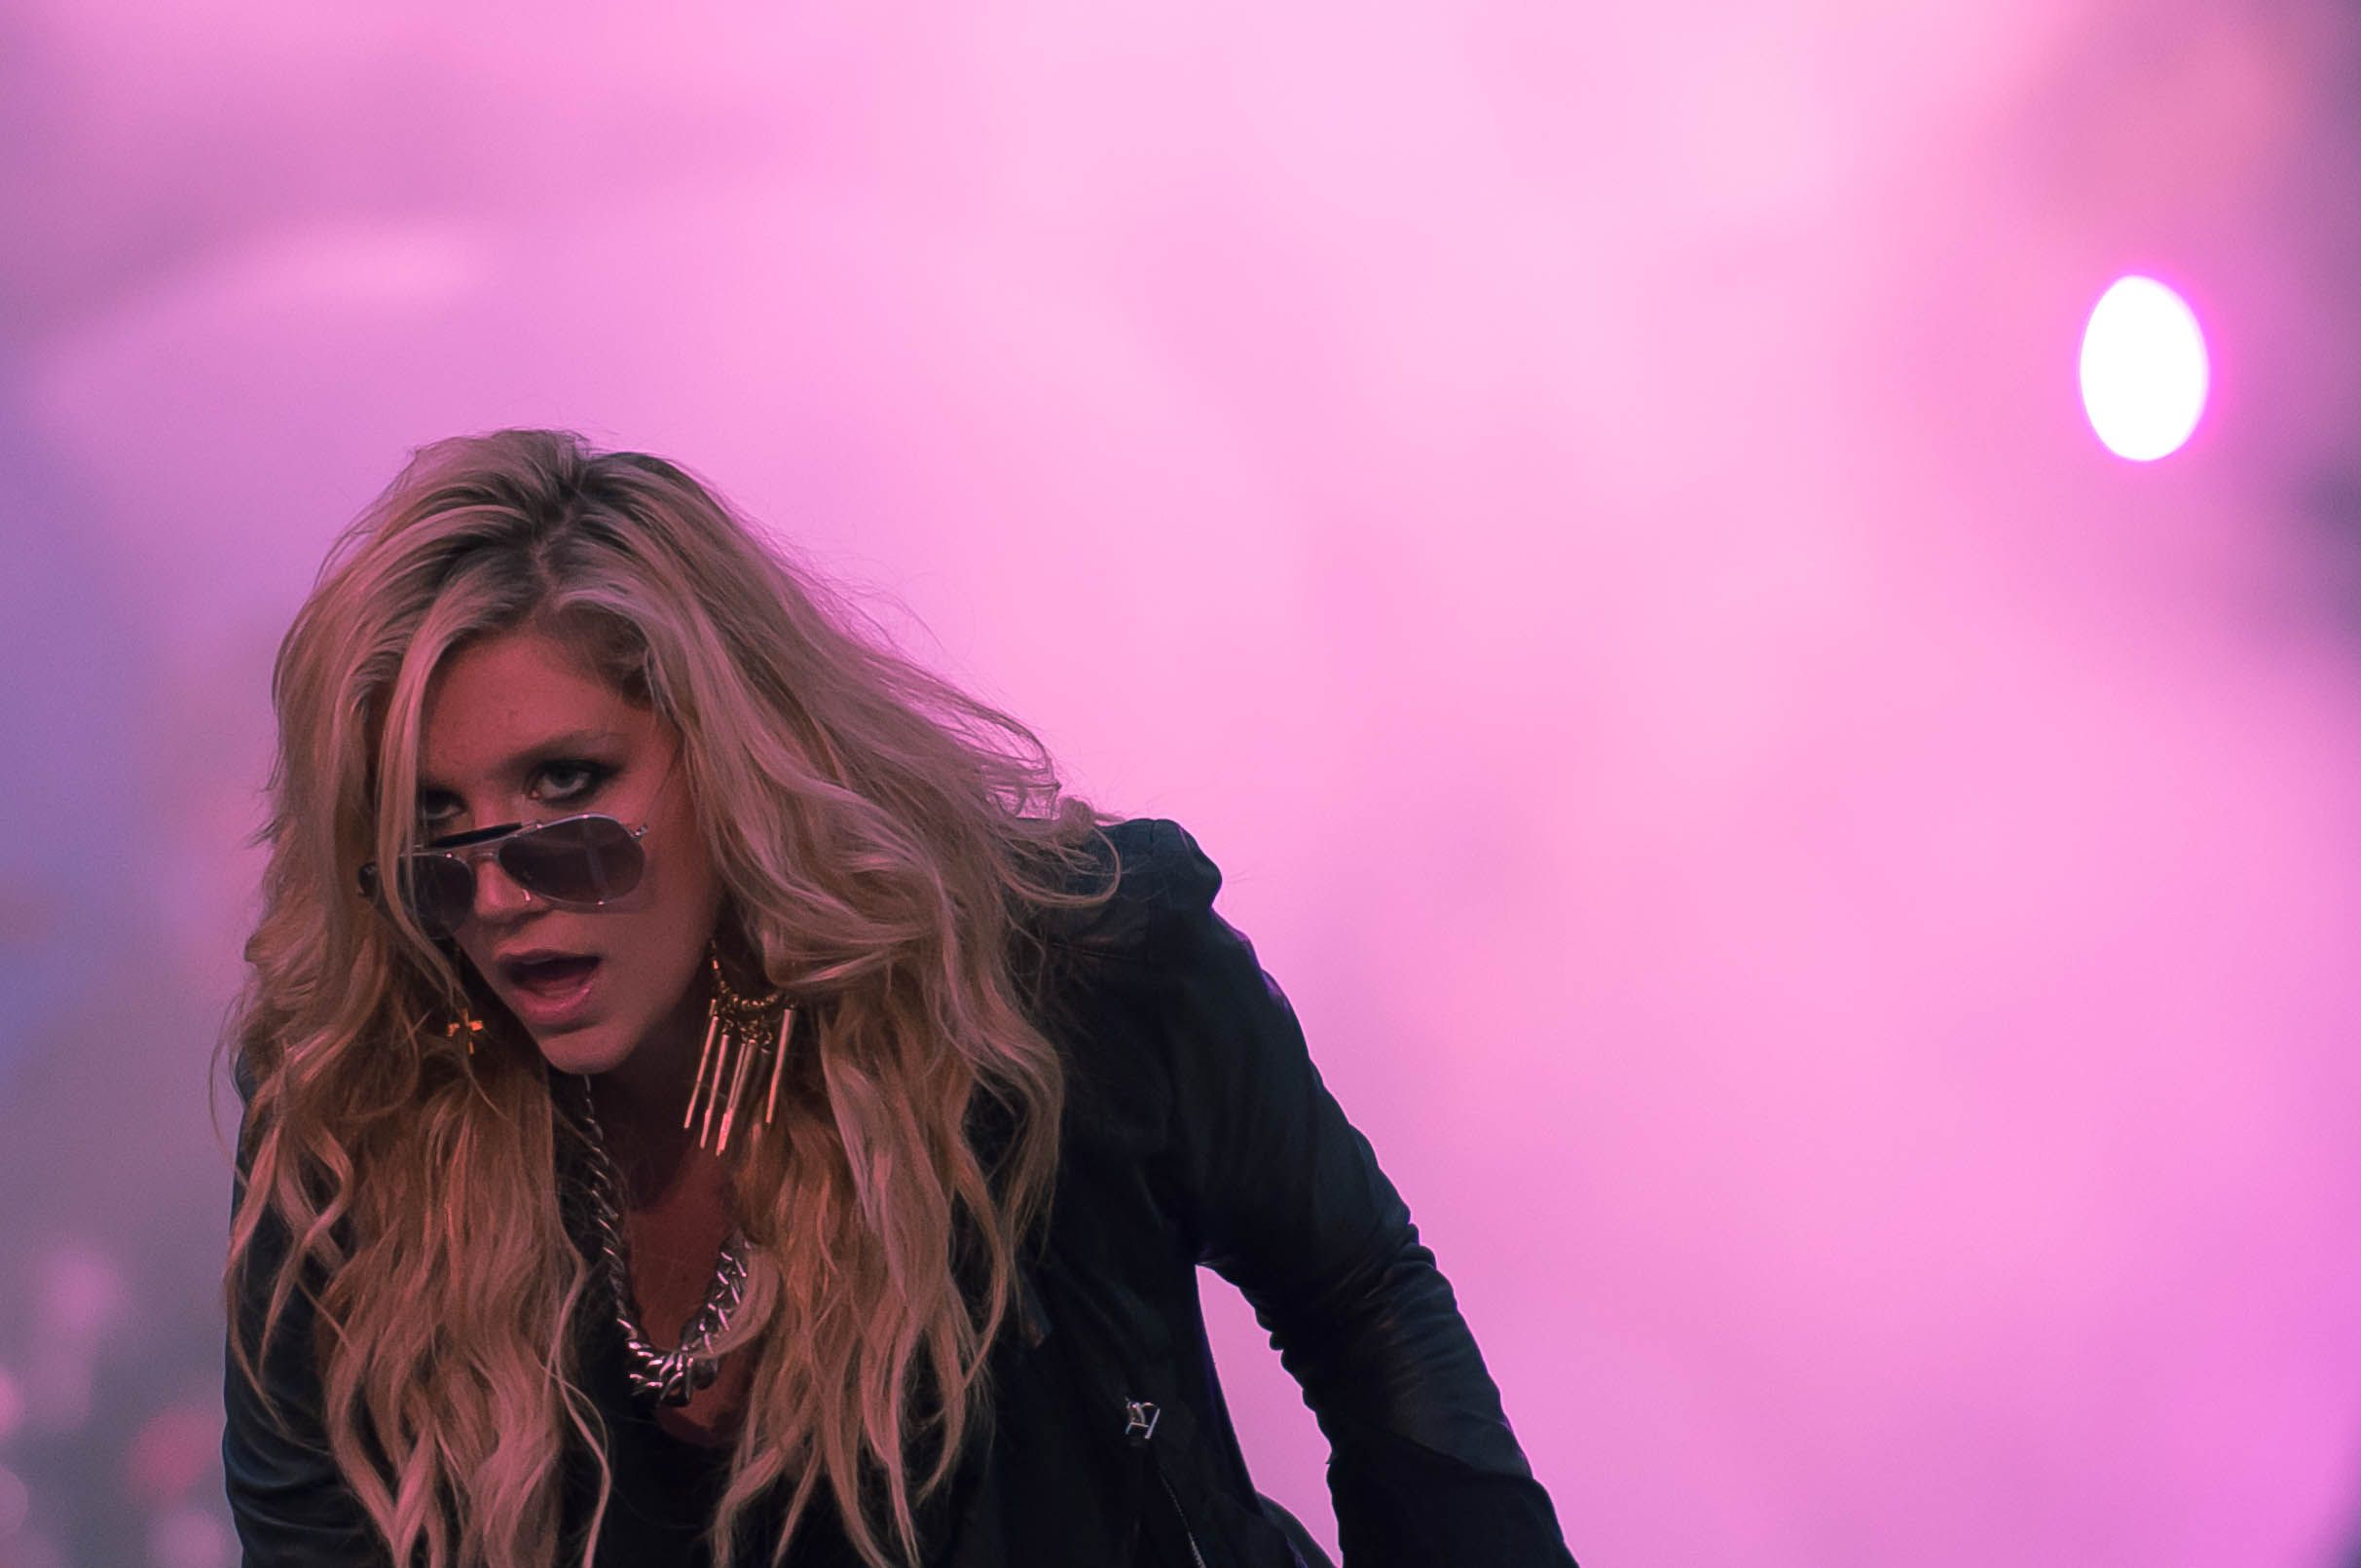 Why Kesha's Single Praying Could Be a Message for the #MeToo Campaign